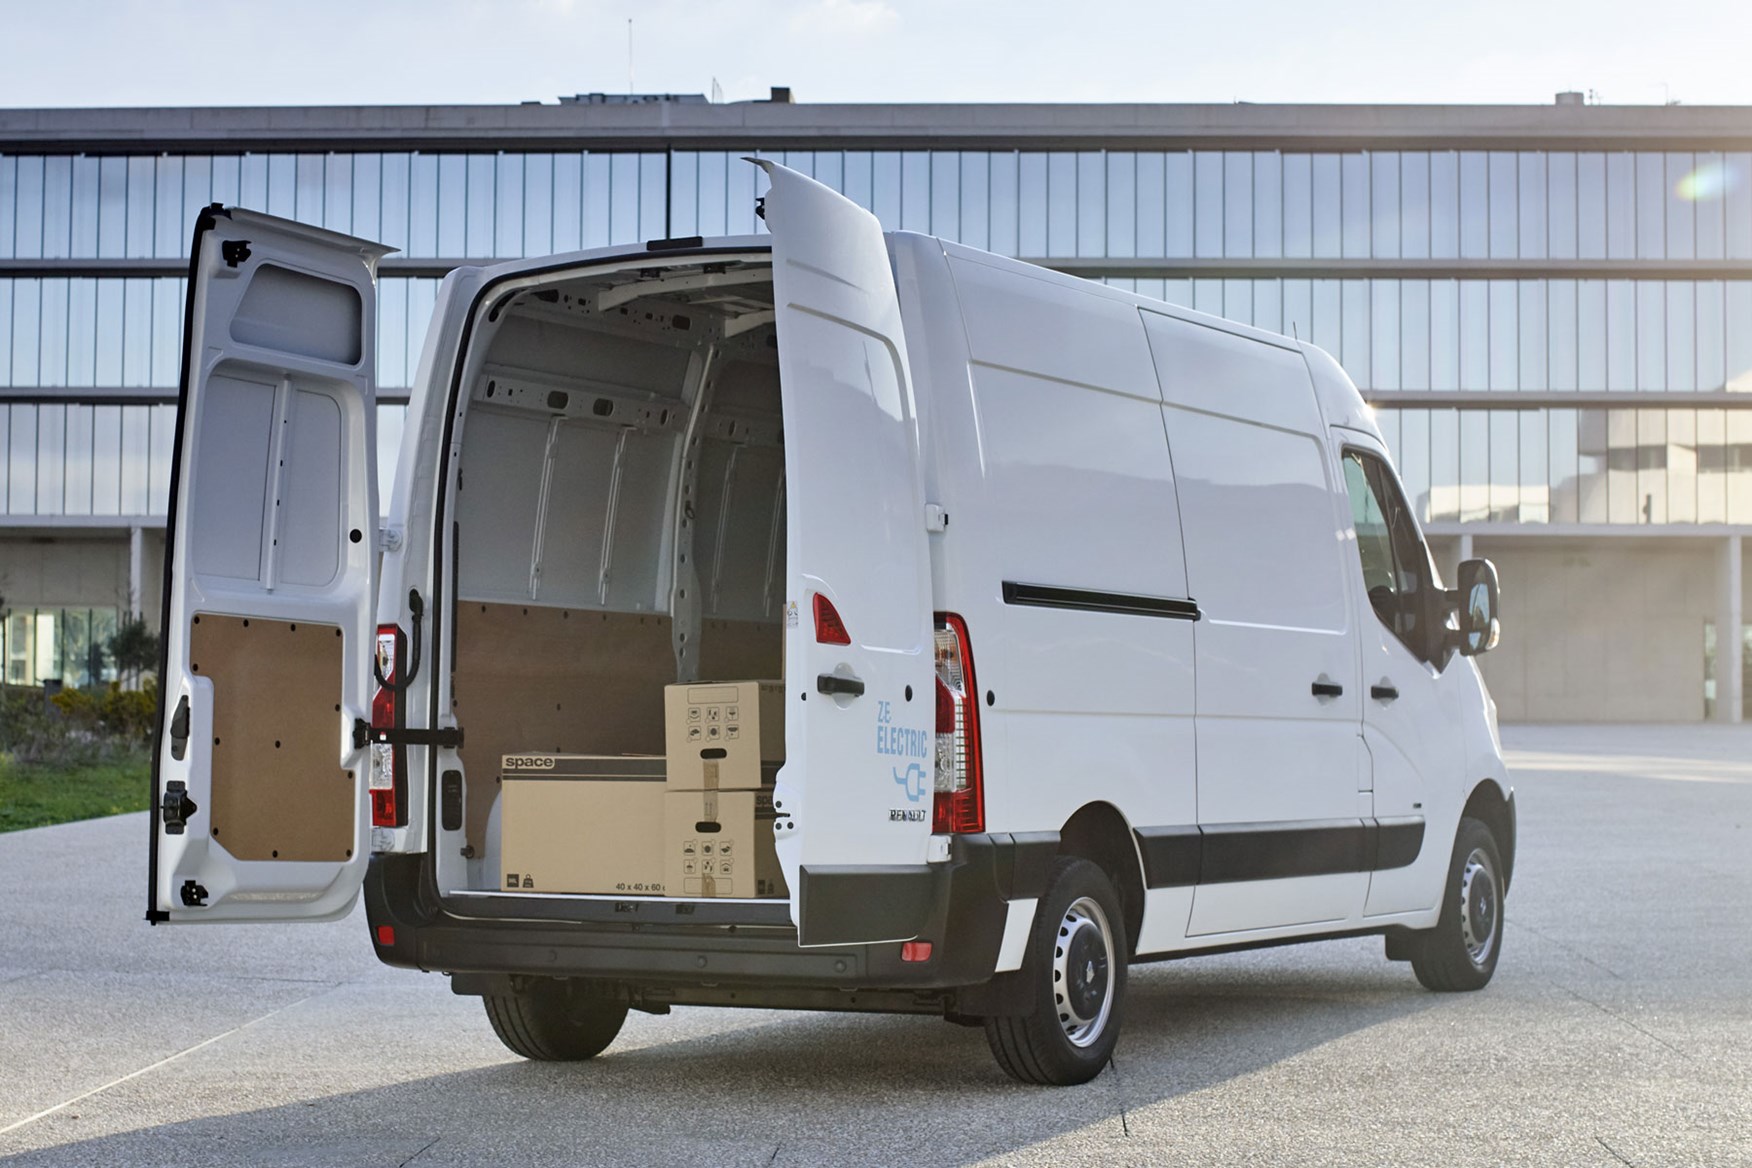 Renault Master ZE electric van review, 2020 - rear view, load area with boxes